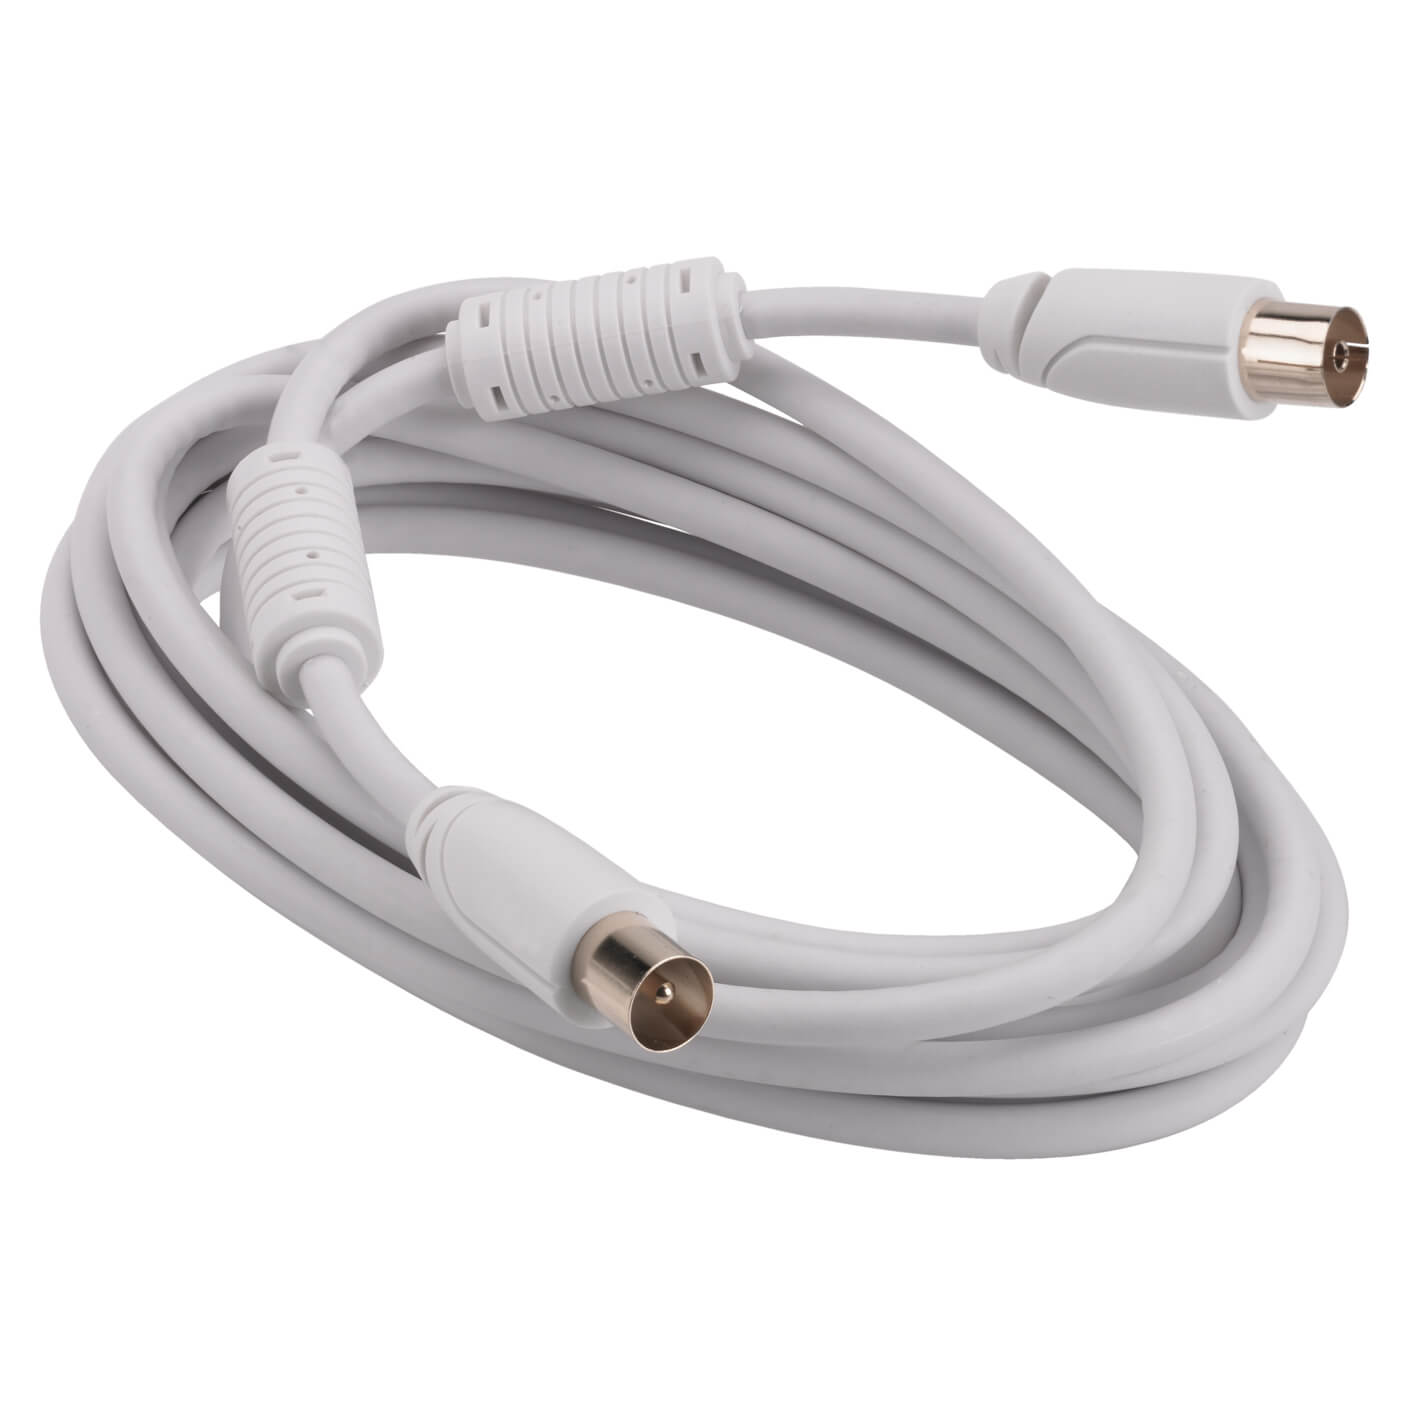 Antenna Extension Cable, 3,0 m, White